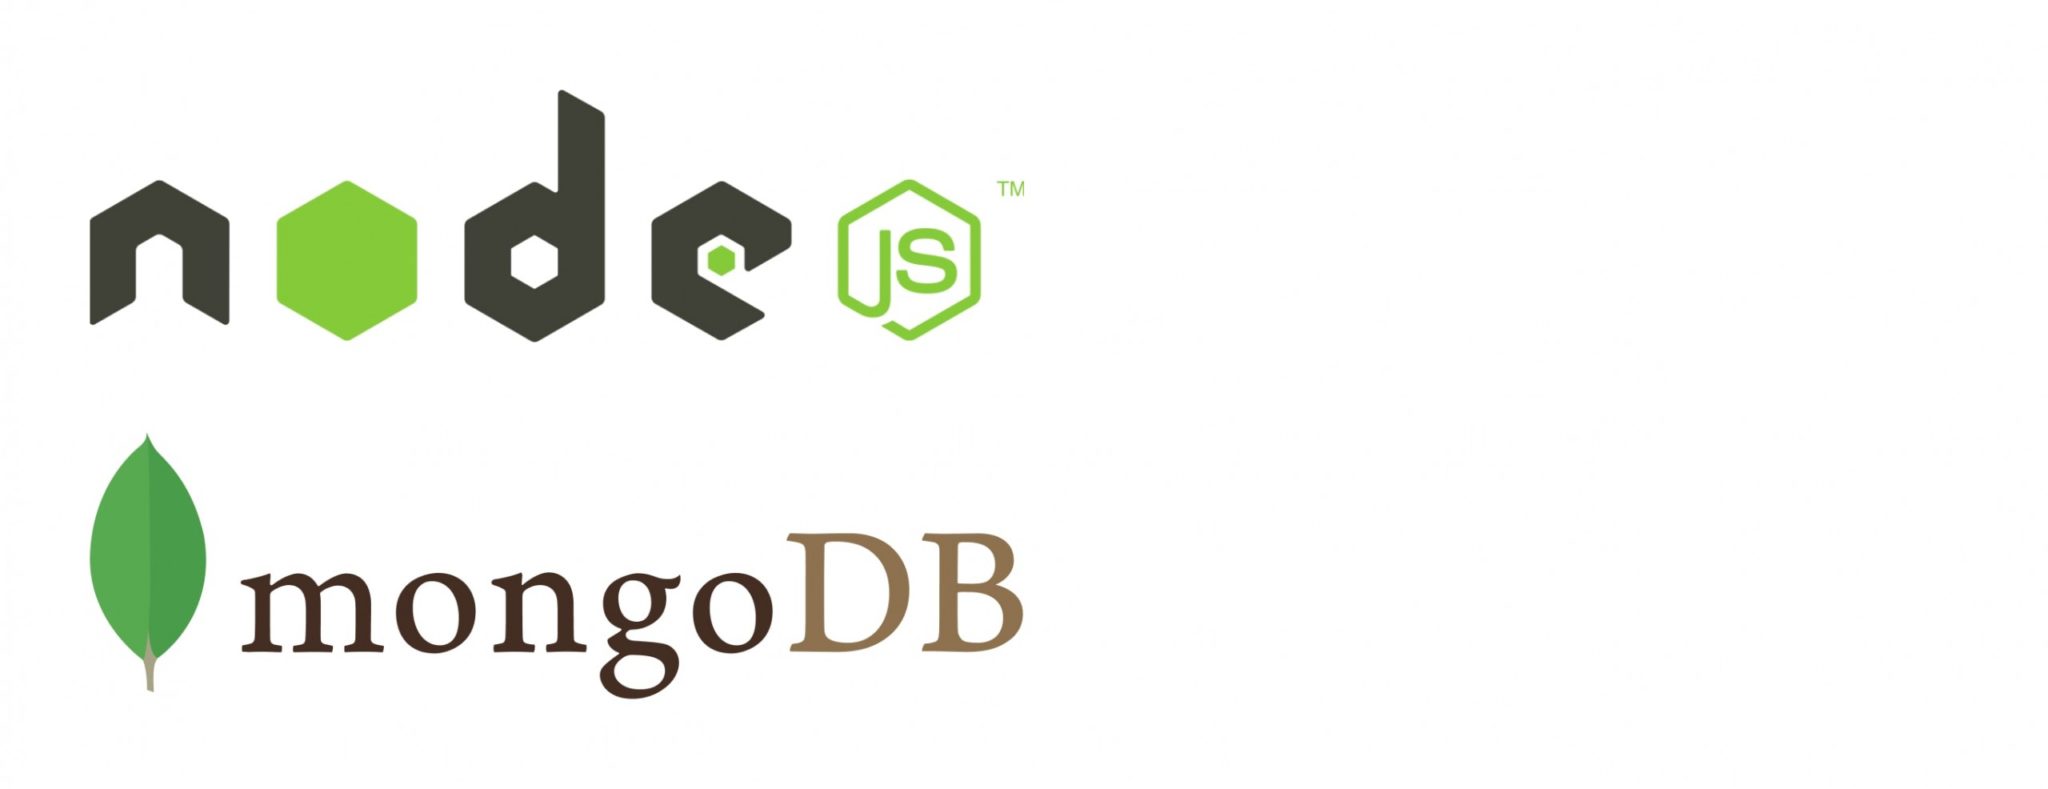 How to use MongoDB with Nodejs?